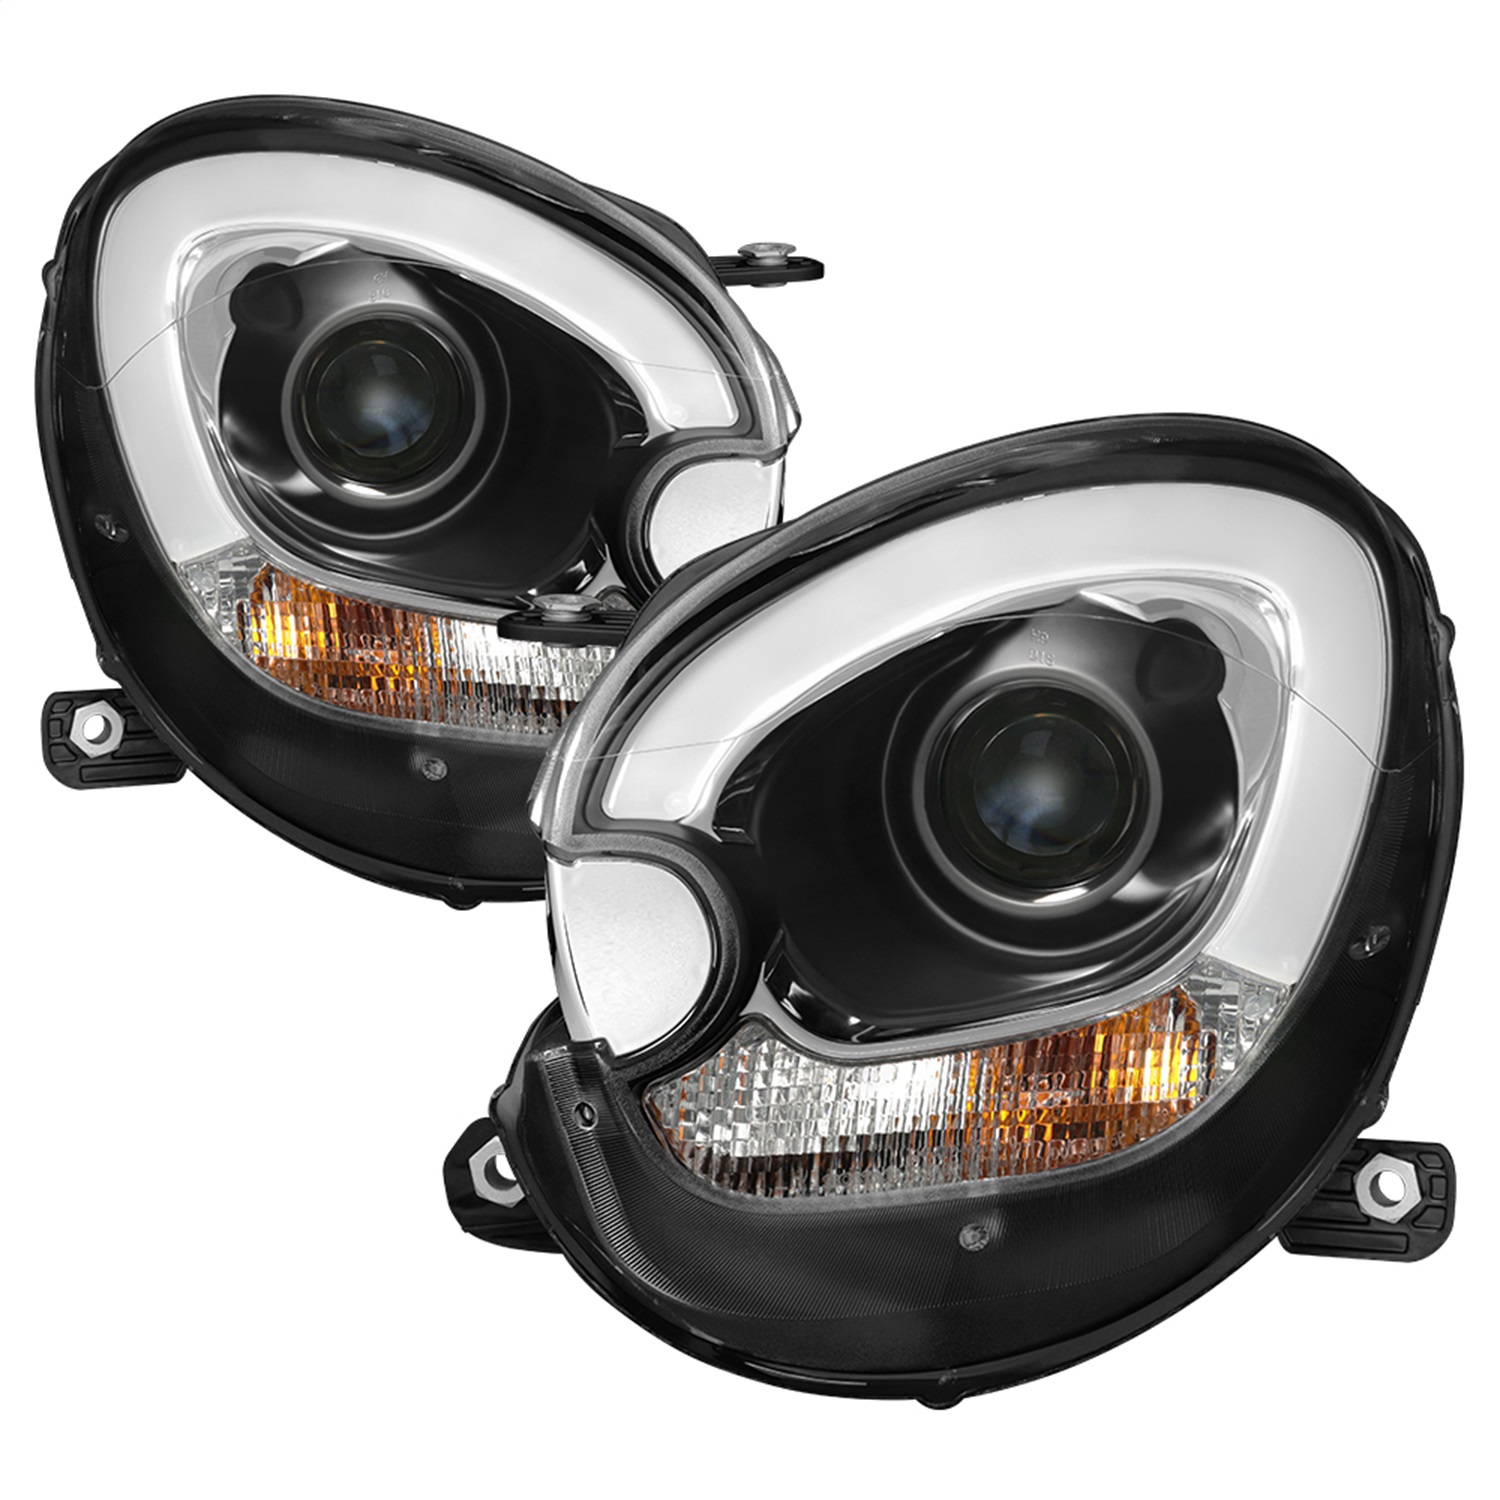 Spyder Auto 5083449 LBDRL Projector Headlights Fits 11-15 Cooper Countryman